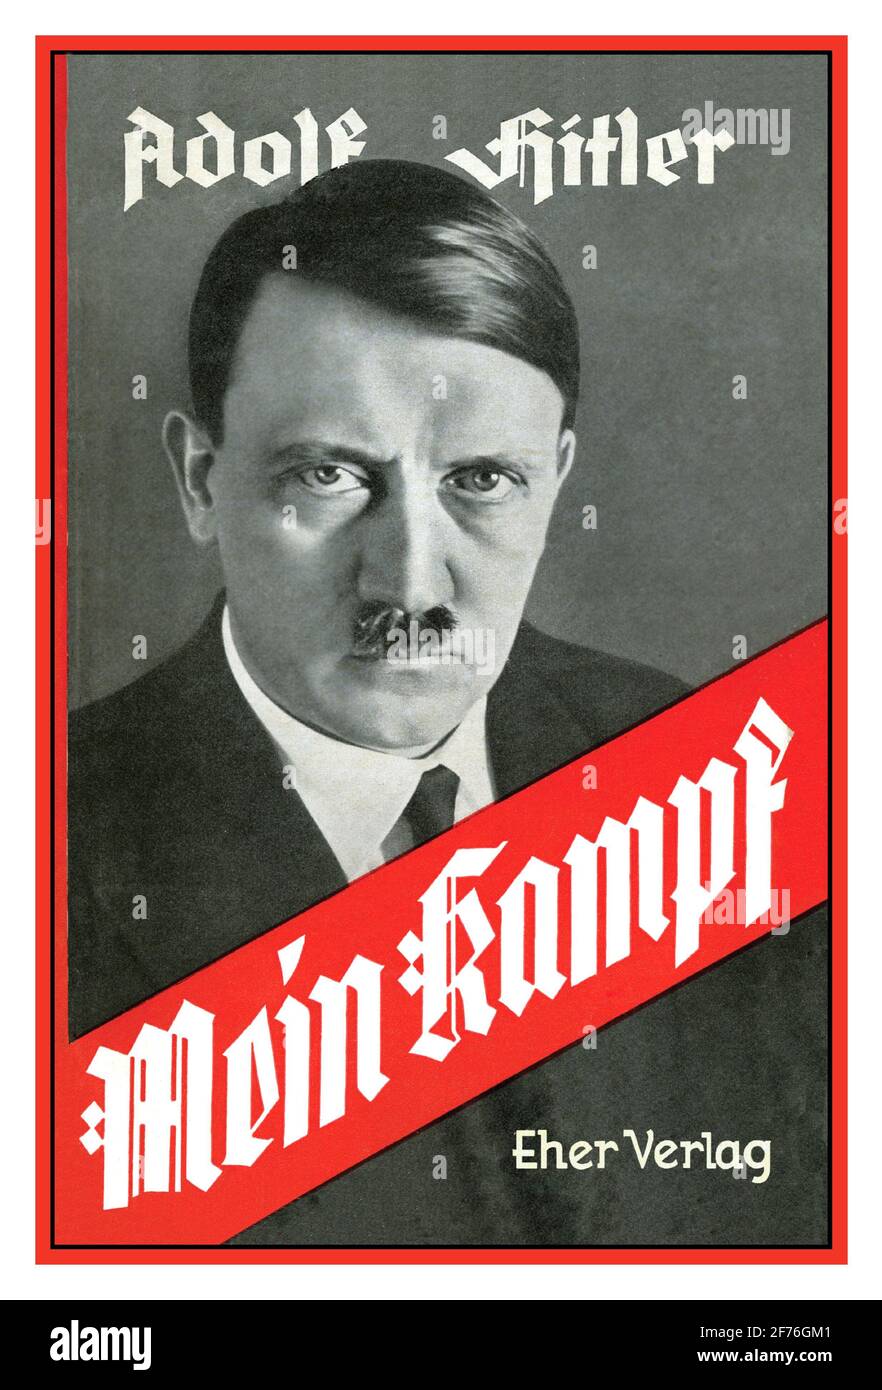 MEIN KAMPF Adolf Hitler front cover book Mein Kampf a 1925 autobiographical manifesto by Nazi Party leader Adolf Hitler. The work describes the process by which Hitler became antisemitic and outlines his political ideology and future plans for Germany. Volume 1 of Mein Kampf was published in 1925 and Volume 2 in 1926. Stock Photo